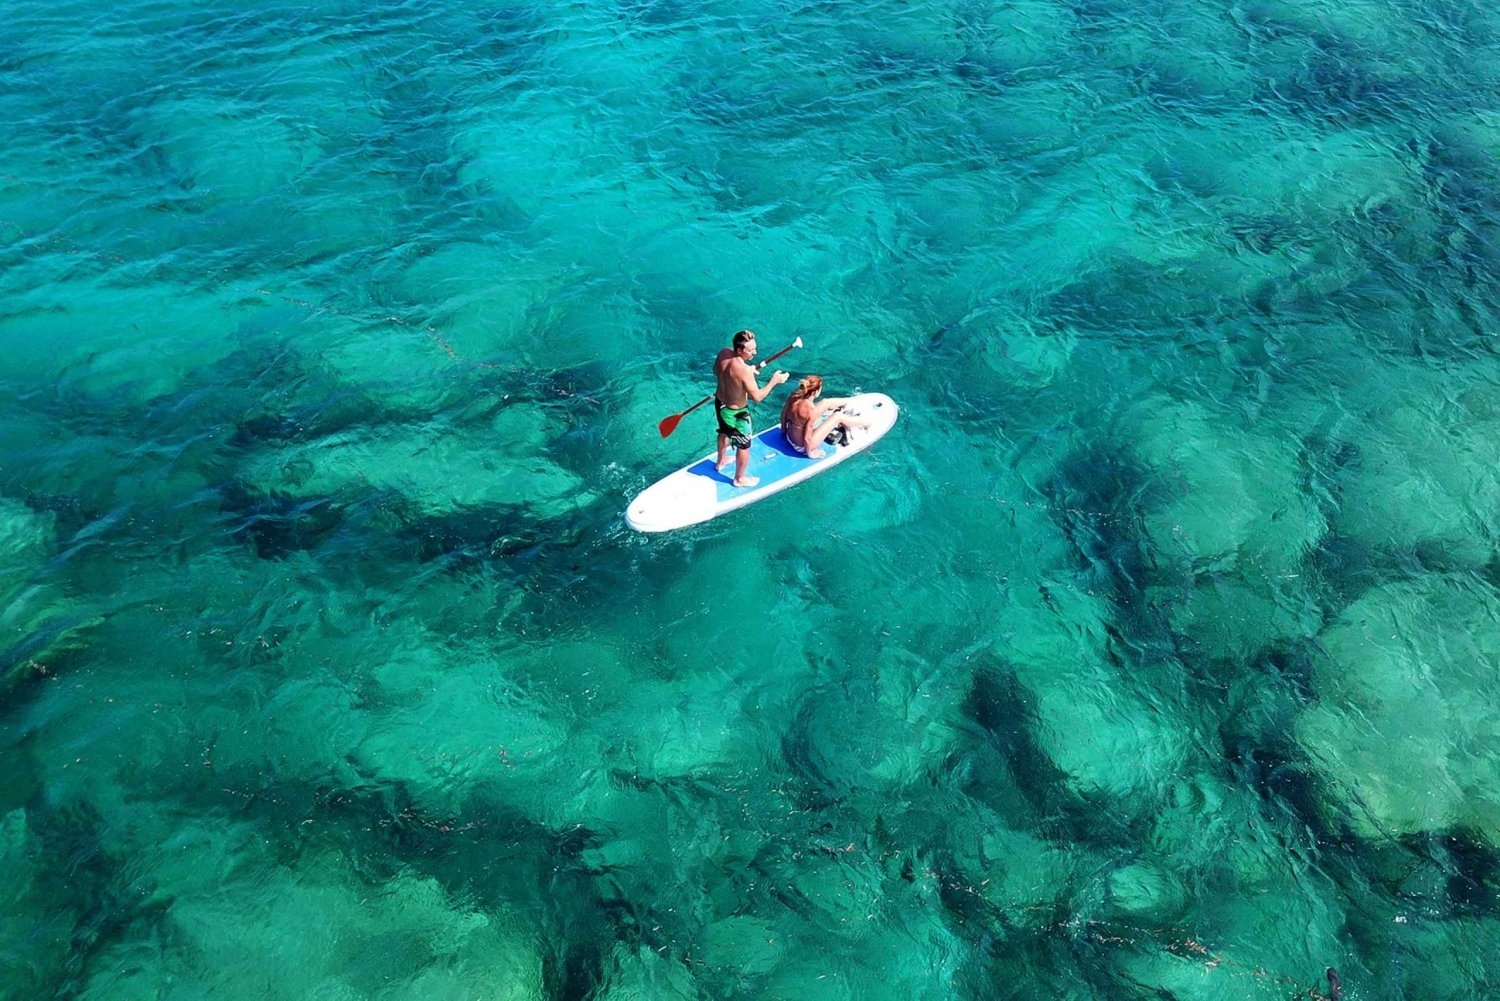 Malta: Guided SUP Tour